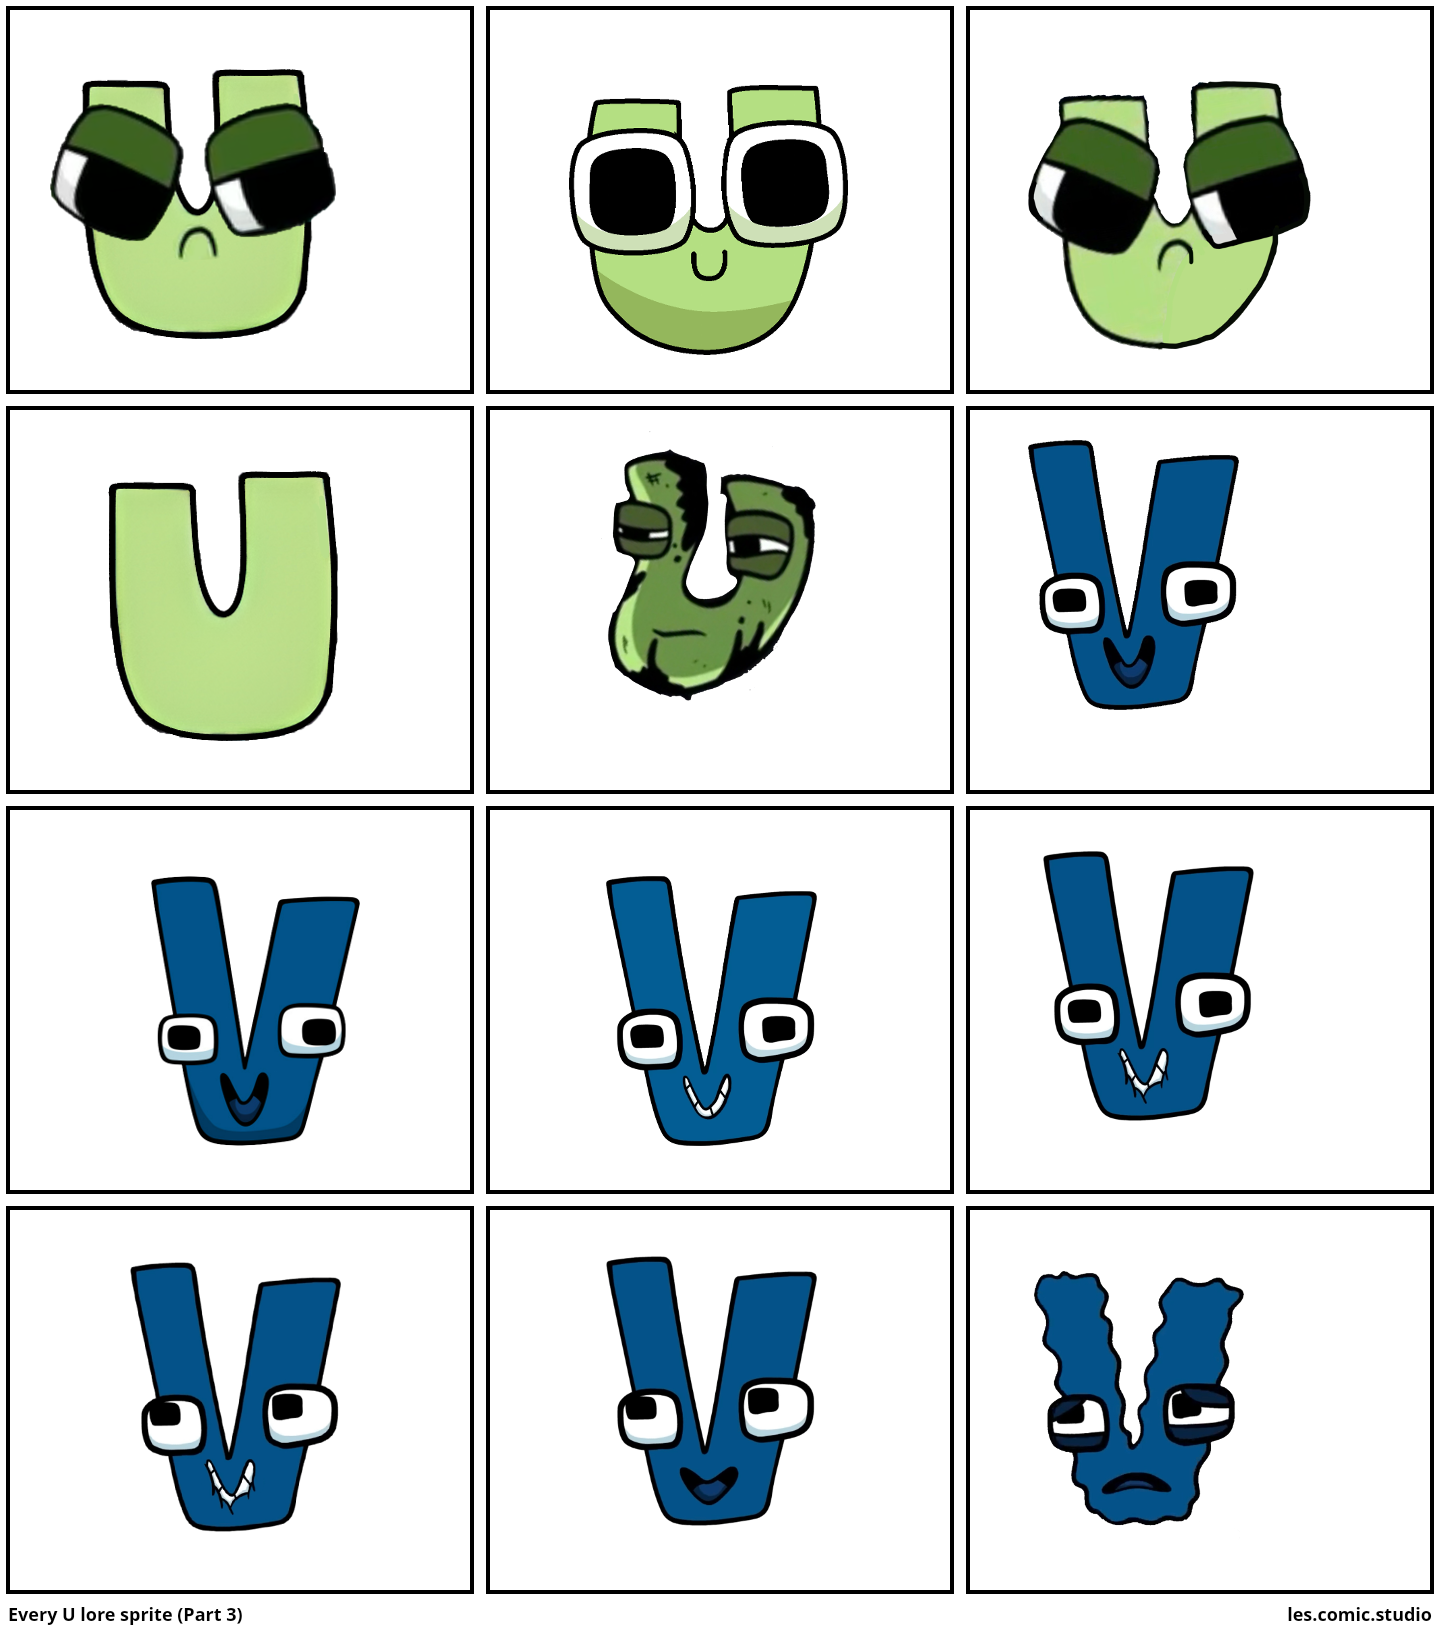 how is this the new alphabet lore with thes sprite - Comic Studio